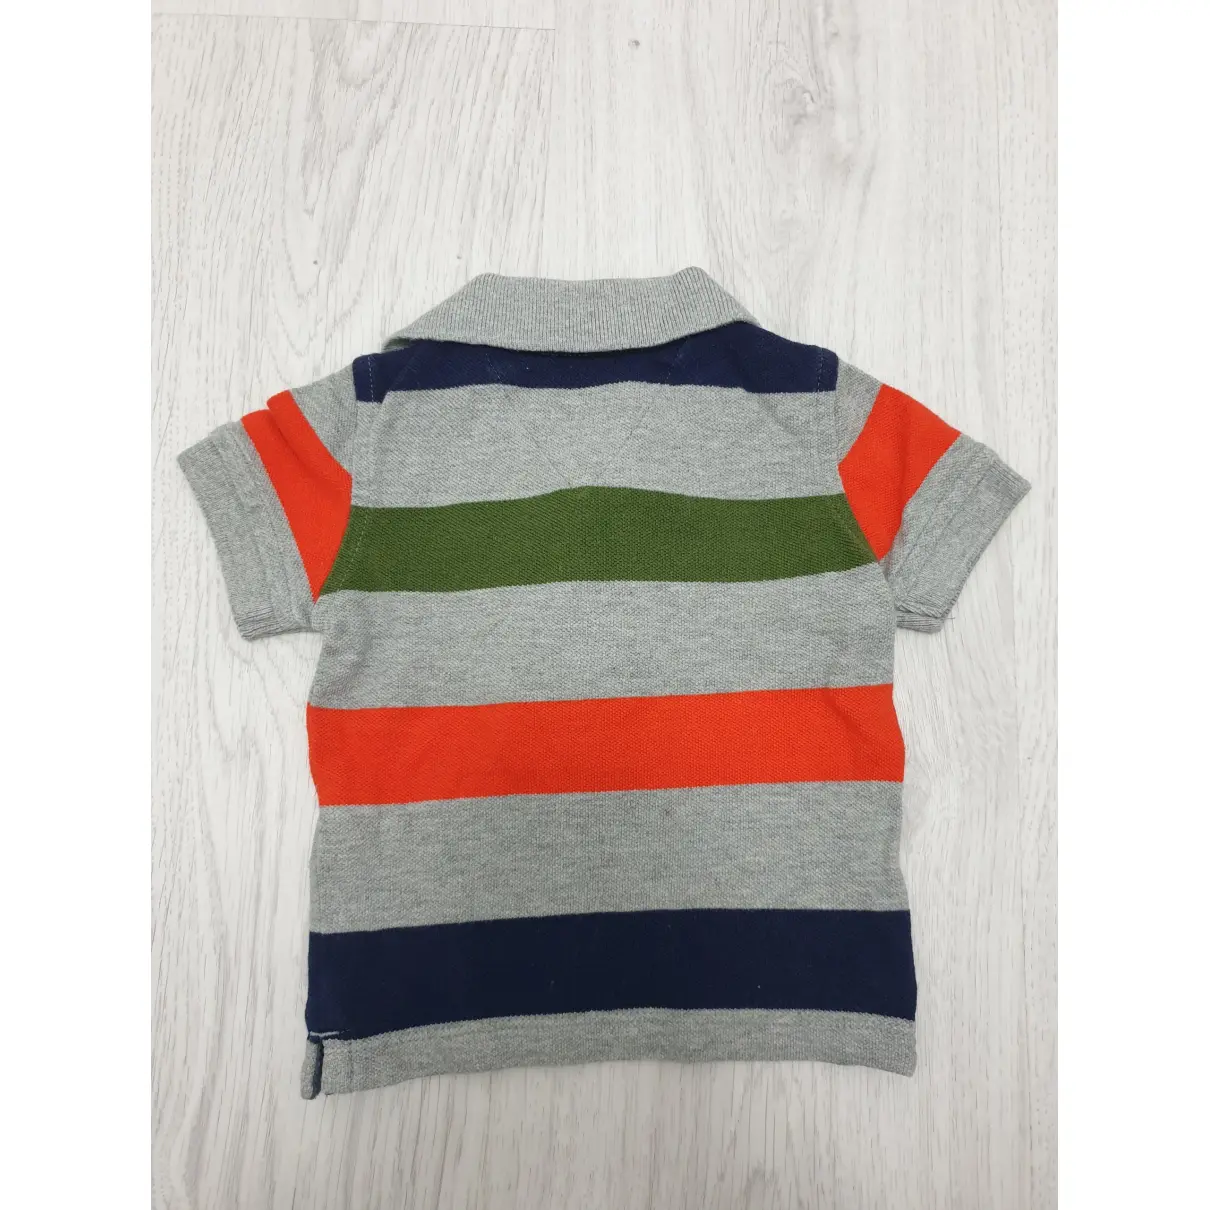 Buy Tommy Hilfiger Polo online